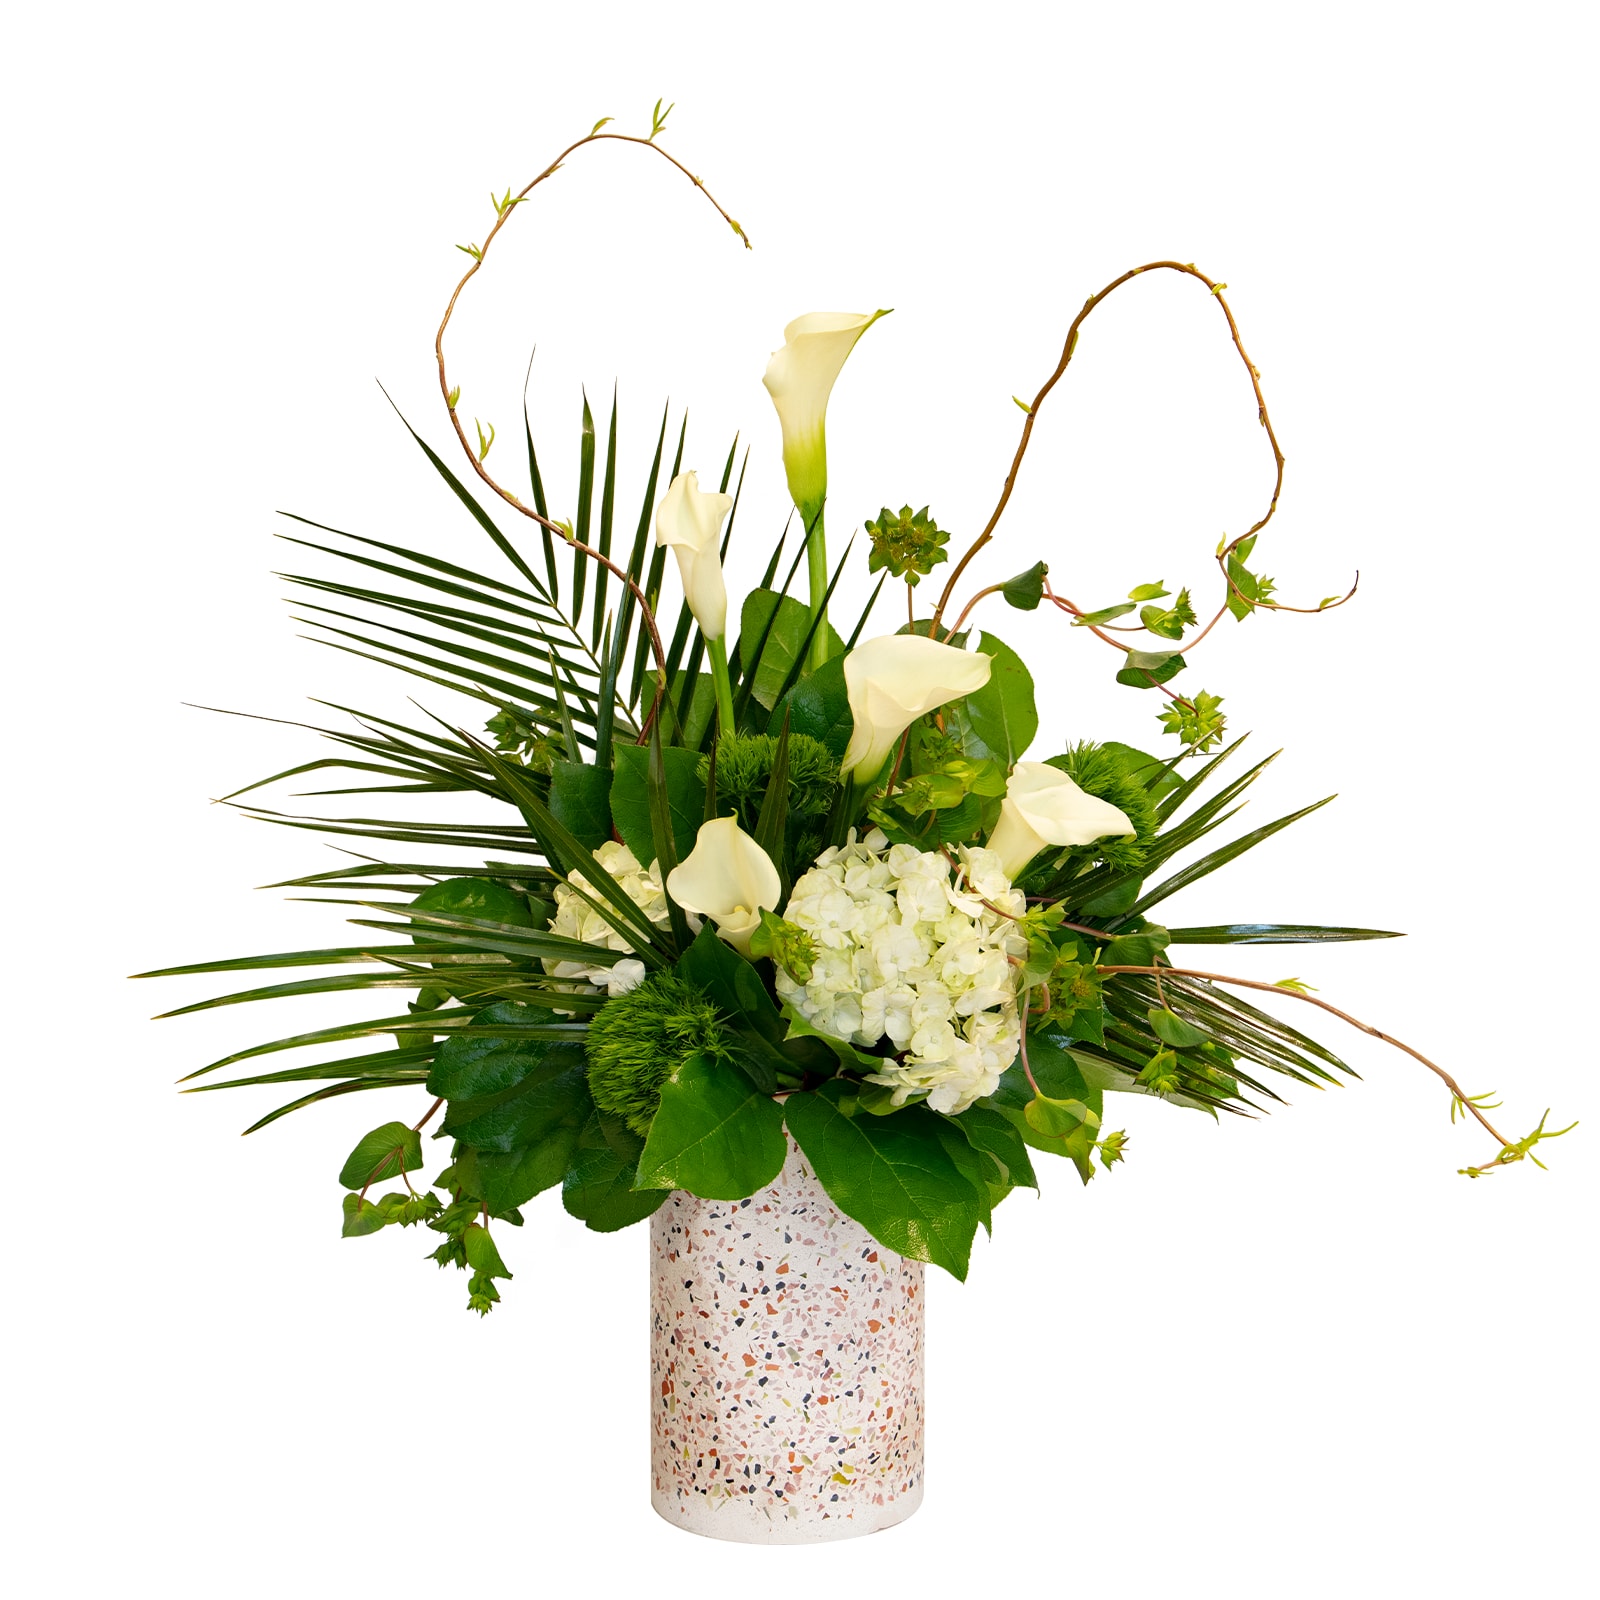 Palmetto - This oasis in the dessert unites the beauty of White Callas, Delicate Hydrangeas, &amp; mixed textures like Trick Dianthus and Curly Willow. Featuring our beautiful Terrazzo Pot, this soft &amp; sympathetic arrangement is perfect for the home or service.